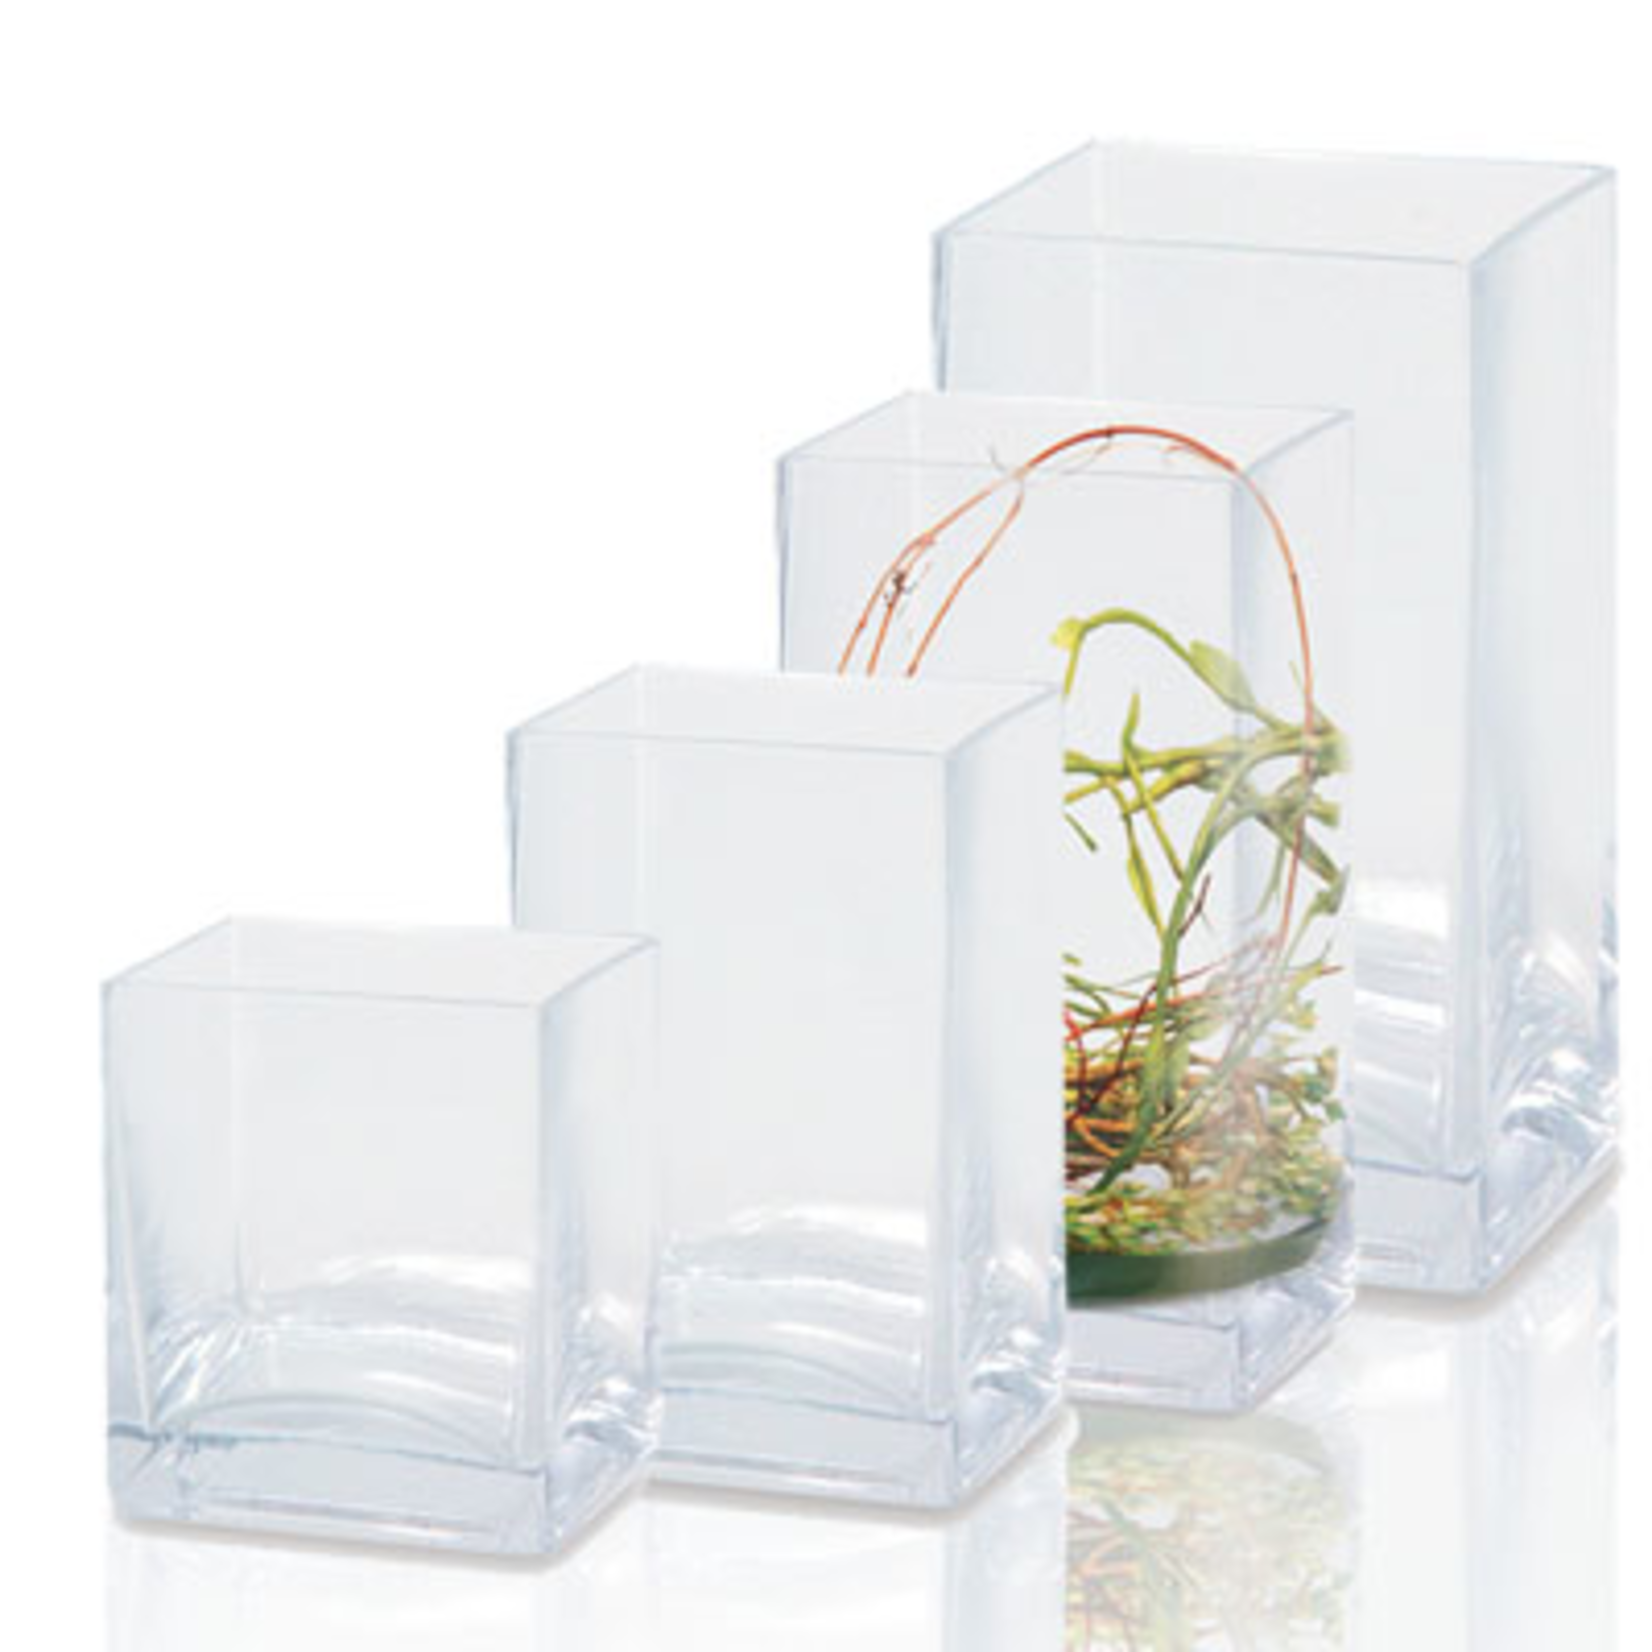 10"H X 6" X 4" CLEAR GLASS RECTANGLE CASE